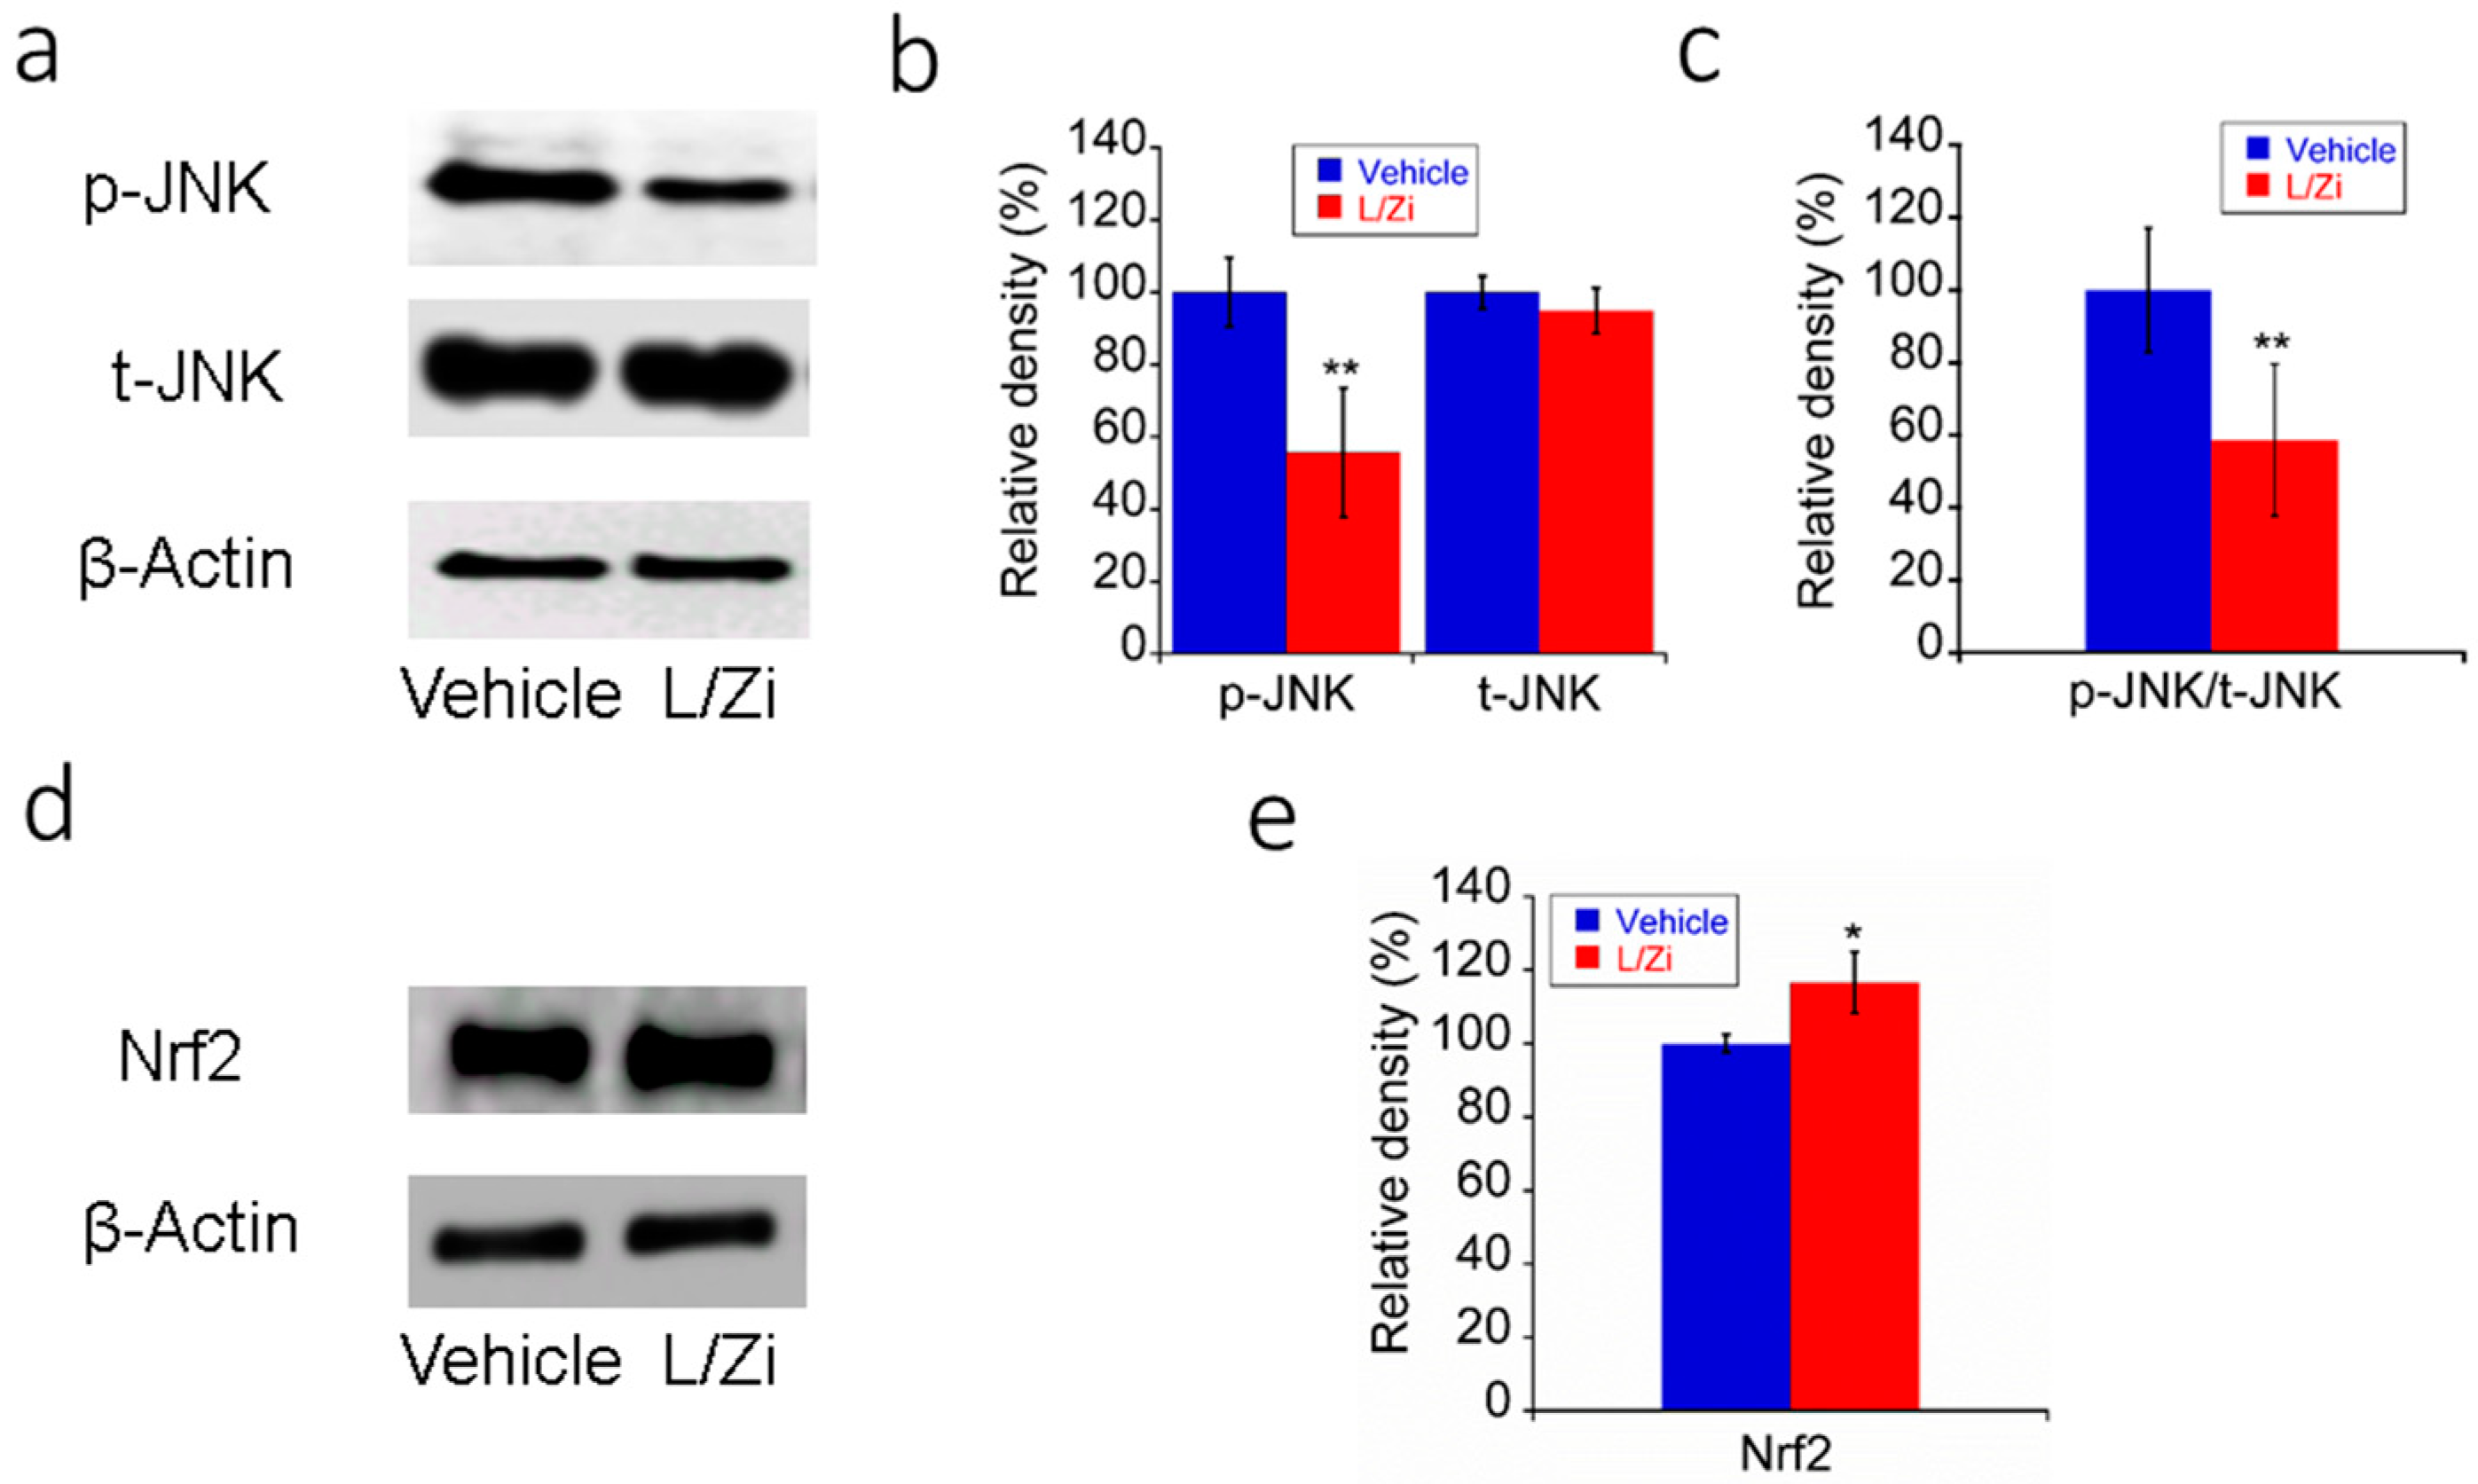 Nutrients Free Full Text Lutein And Zeaxanthin Isomers Protect Against Light Induced Retinopathy Via Decreasing Oxidative And Endoplasmic Reticulum Stress In Balb Cj Mice Html